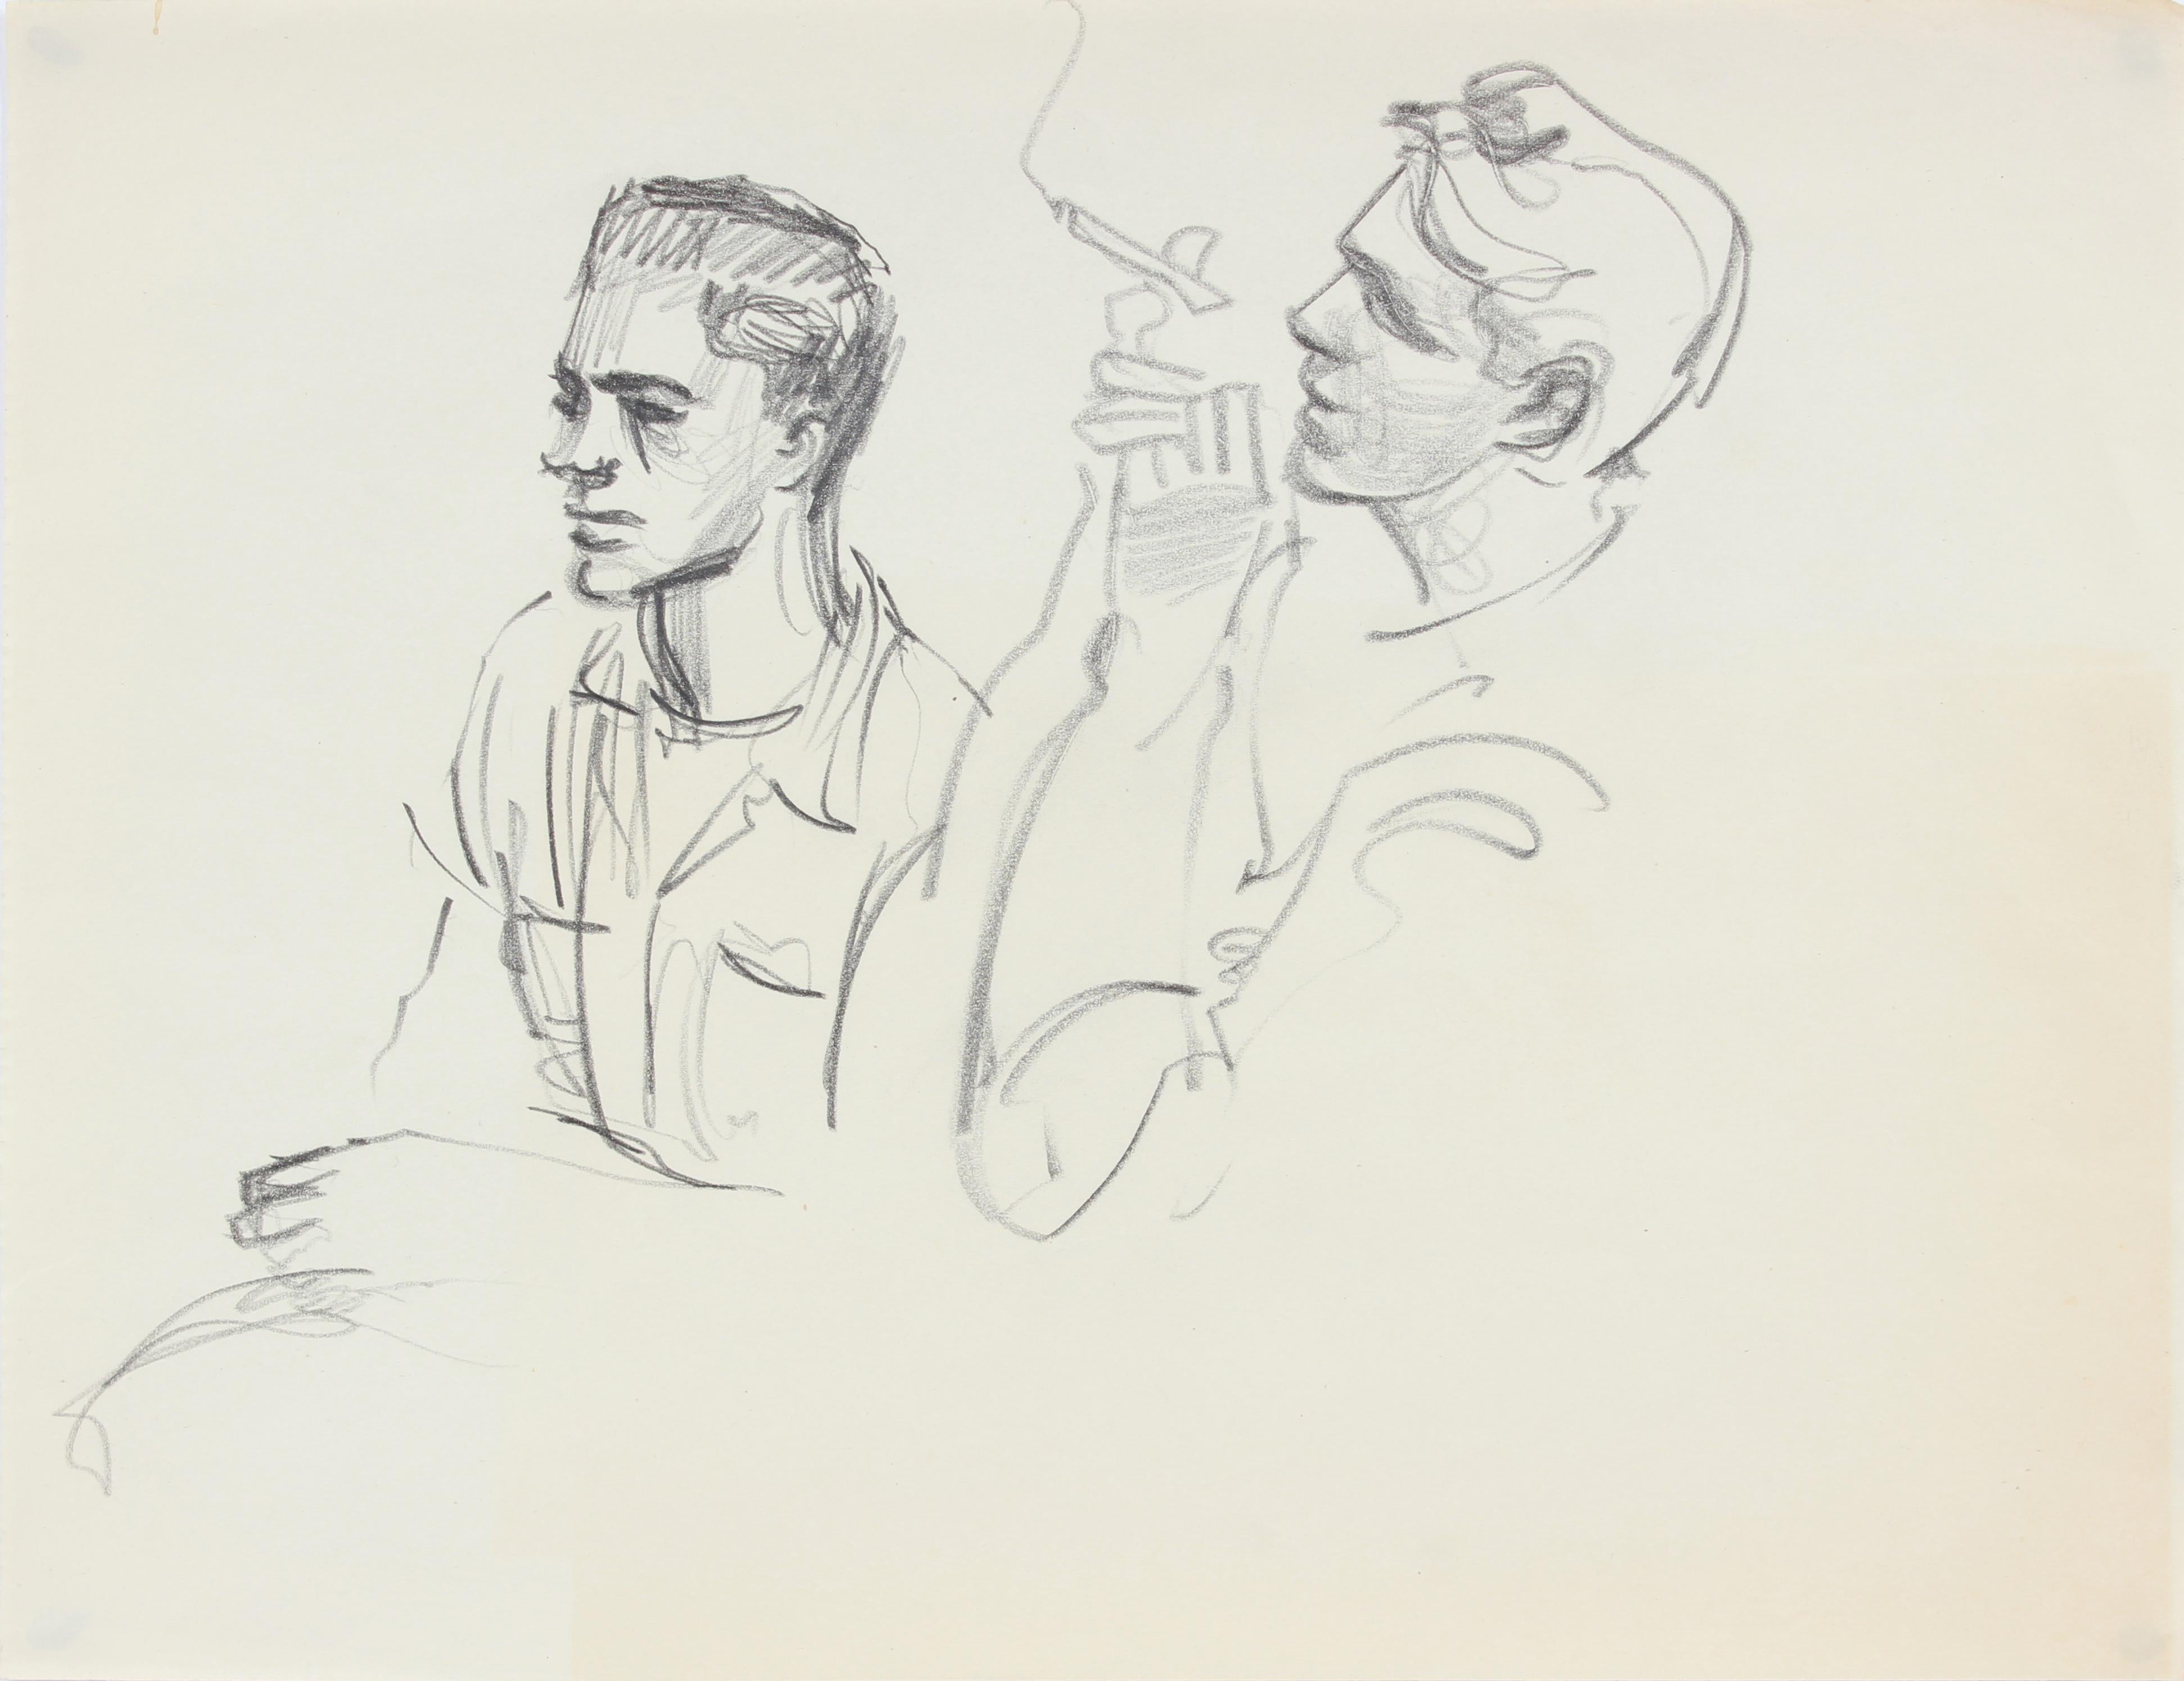 This vintage 1940-50s charcoal portrait study of two young men smoking in New York is by second generation New York School artist Richard Caldwell Brewer (1923-2014). Brewer along with his charmed circle of artist friends, represent the lesser known